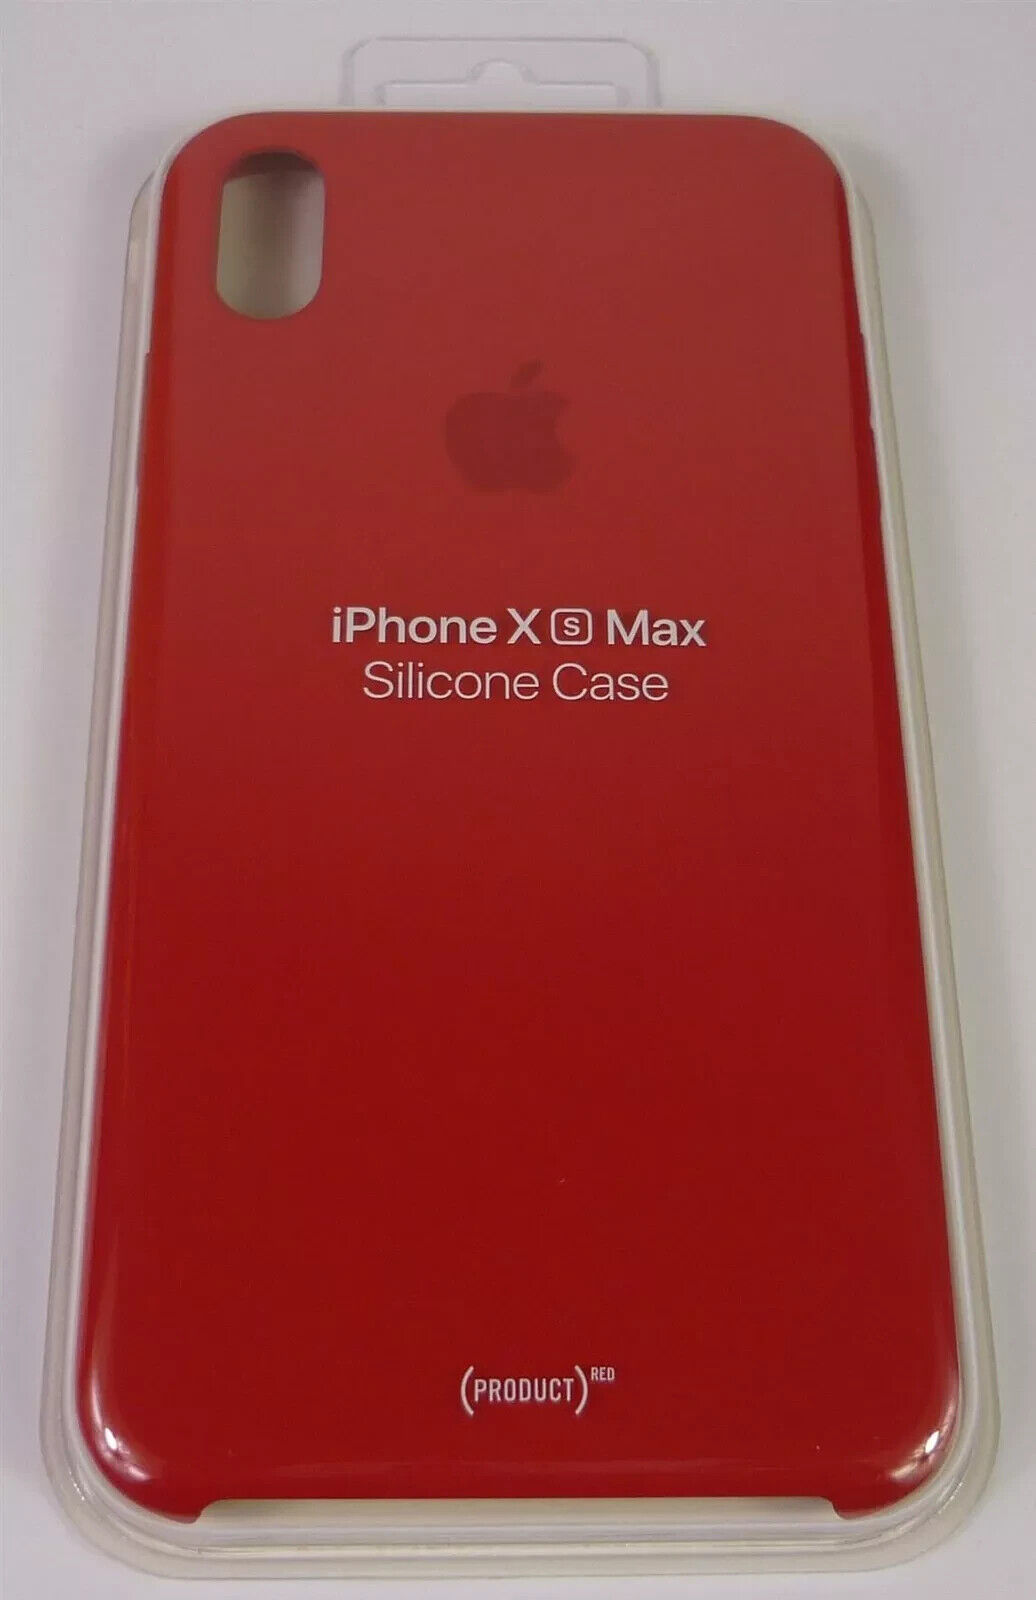 Primary image for Genuine Apple iPhone XS Max Silicone Case / Cover (PRODUCT) RED - MRWH2ZM/A New